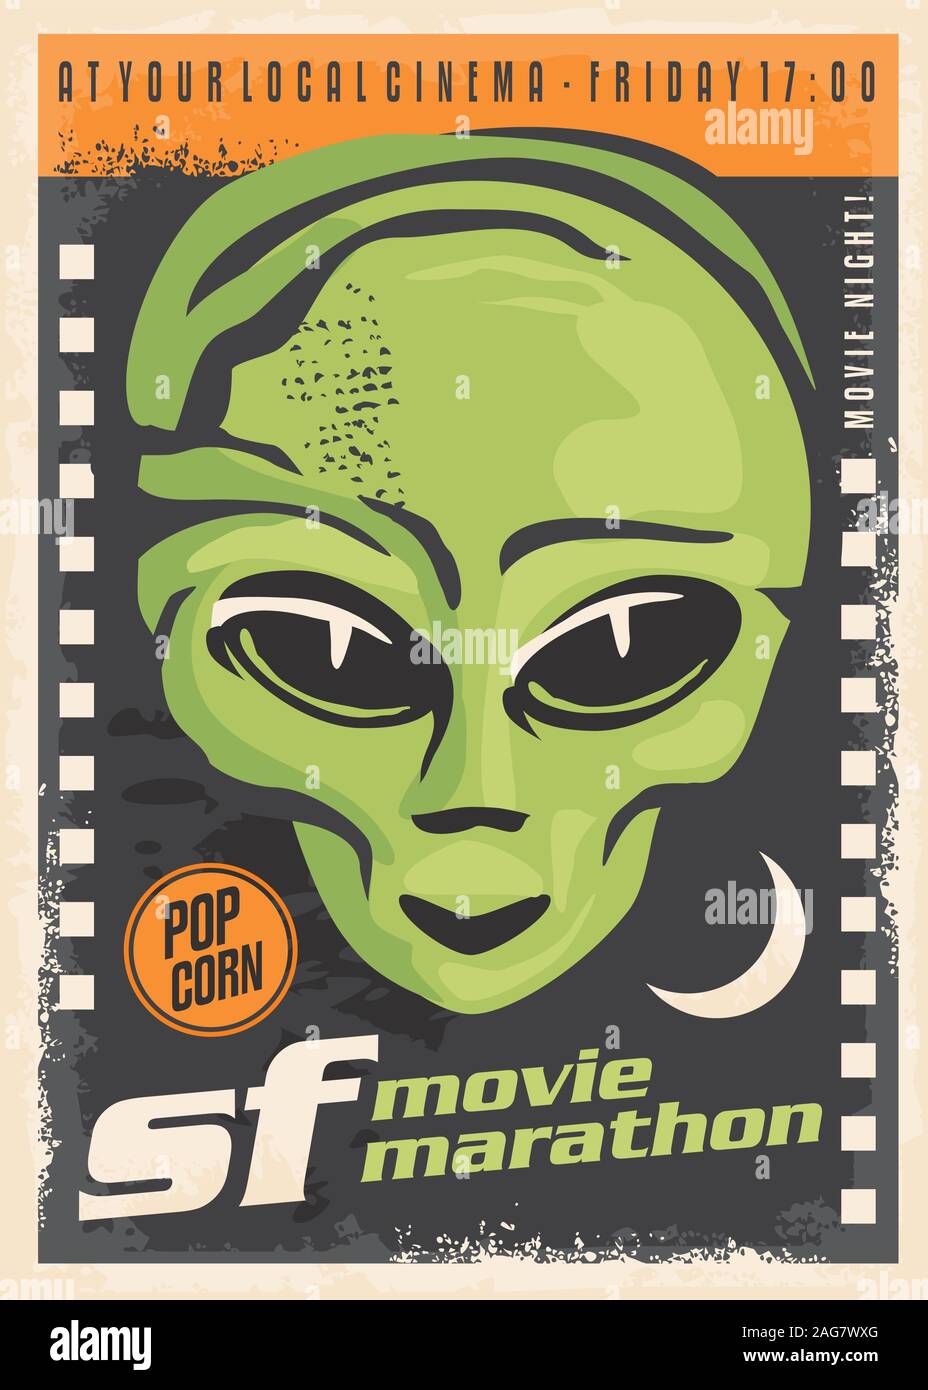 Science fiction movie night retro poster design with alien and film strip on dark background. Cinema event vintage flyer. Vector illustration. Stock Vector